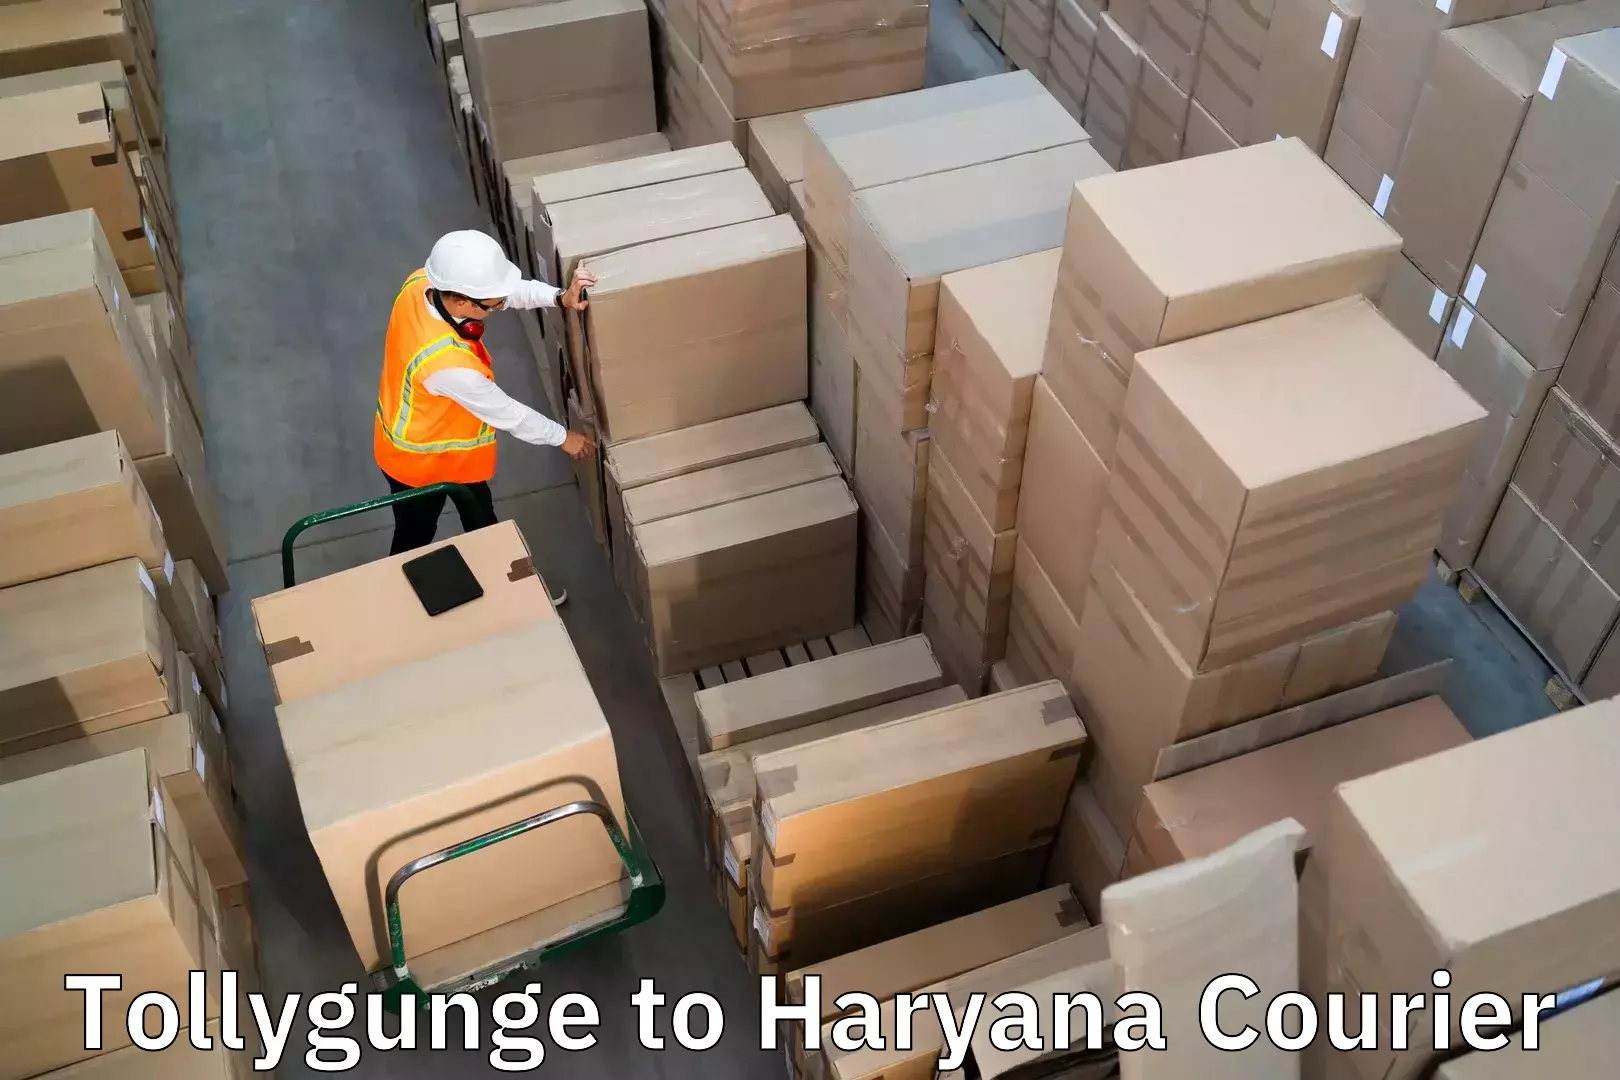 Same day luggage service in Tollygunge to Gurgaon